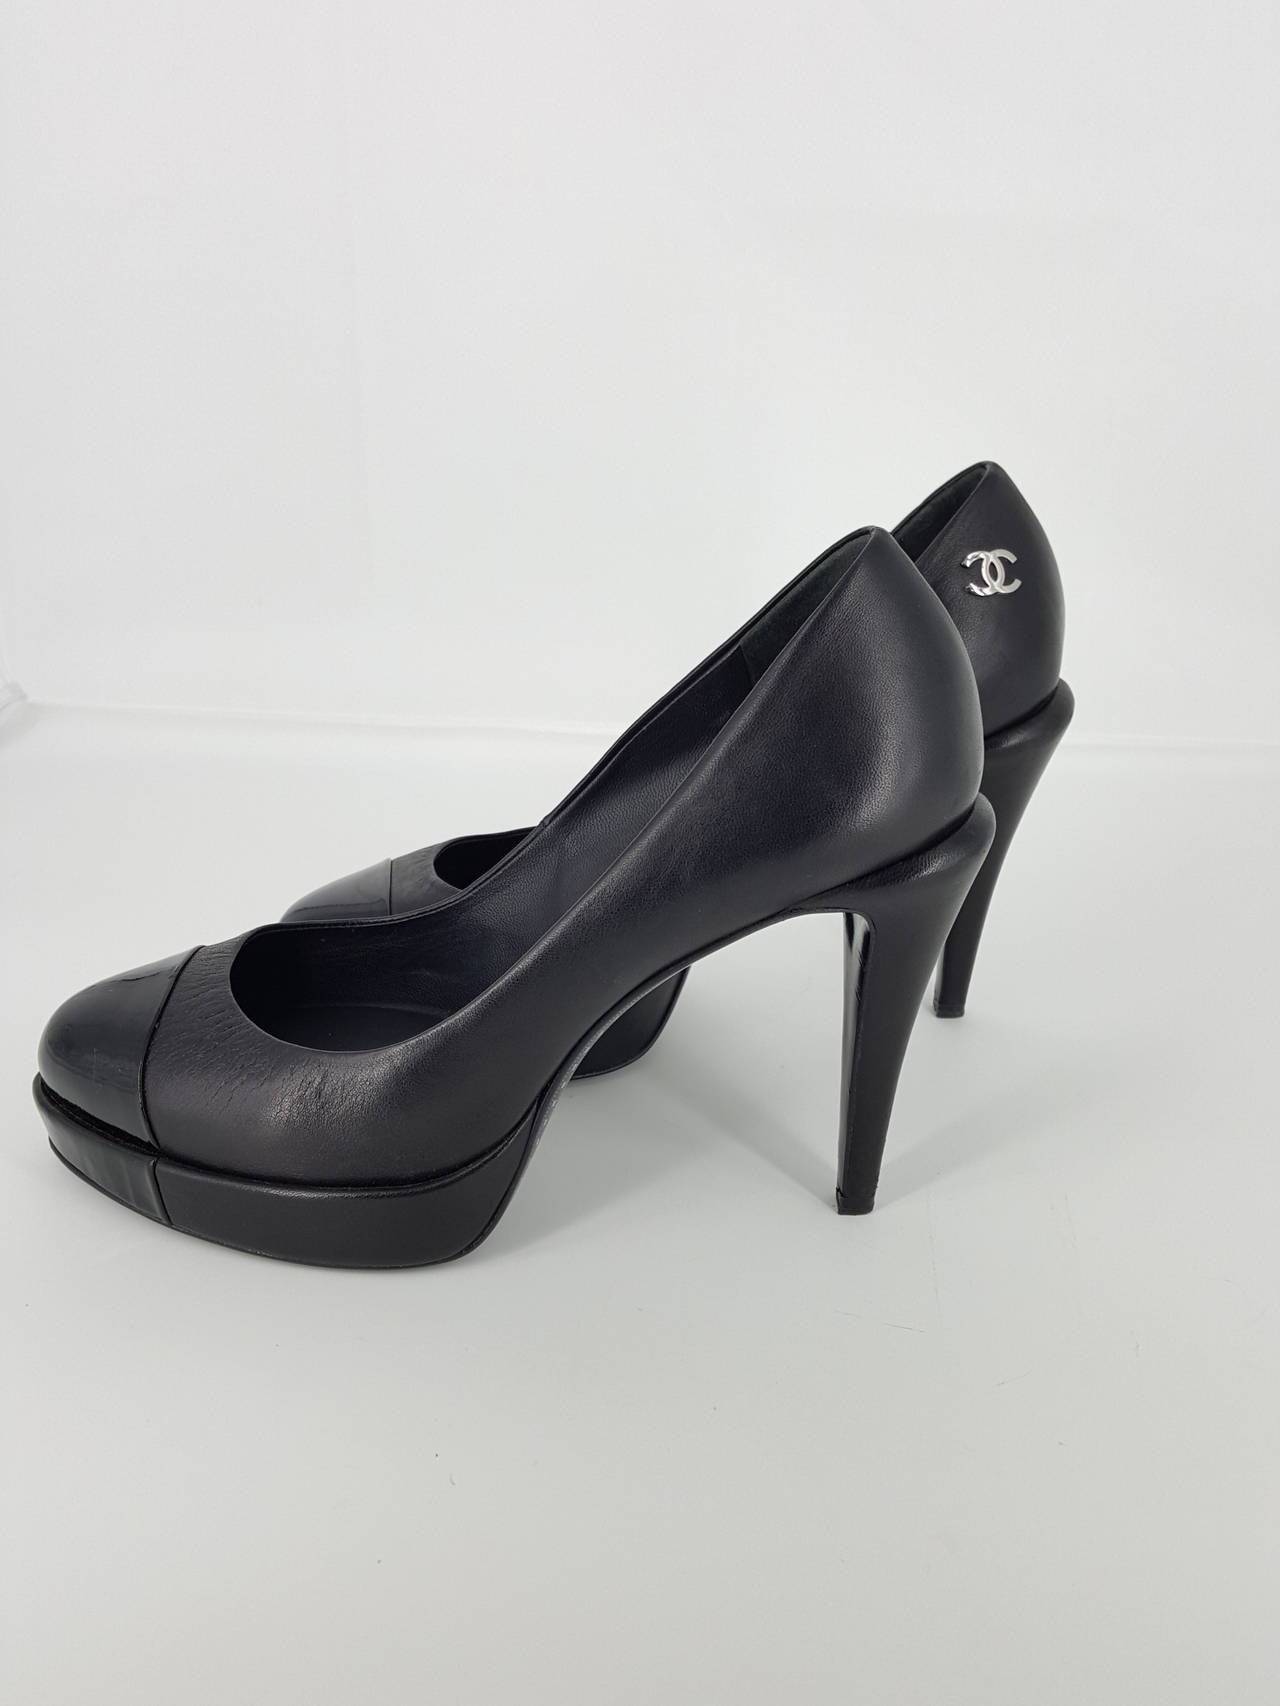 Chanel Black Leather Platform Heels With Patent Leather Toe Cap. size 38 In Excellent Condition For Sale In Delray Beach, FL